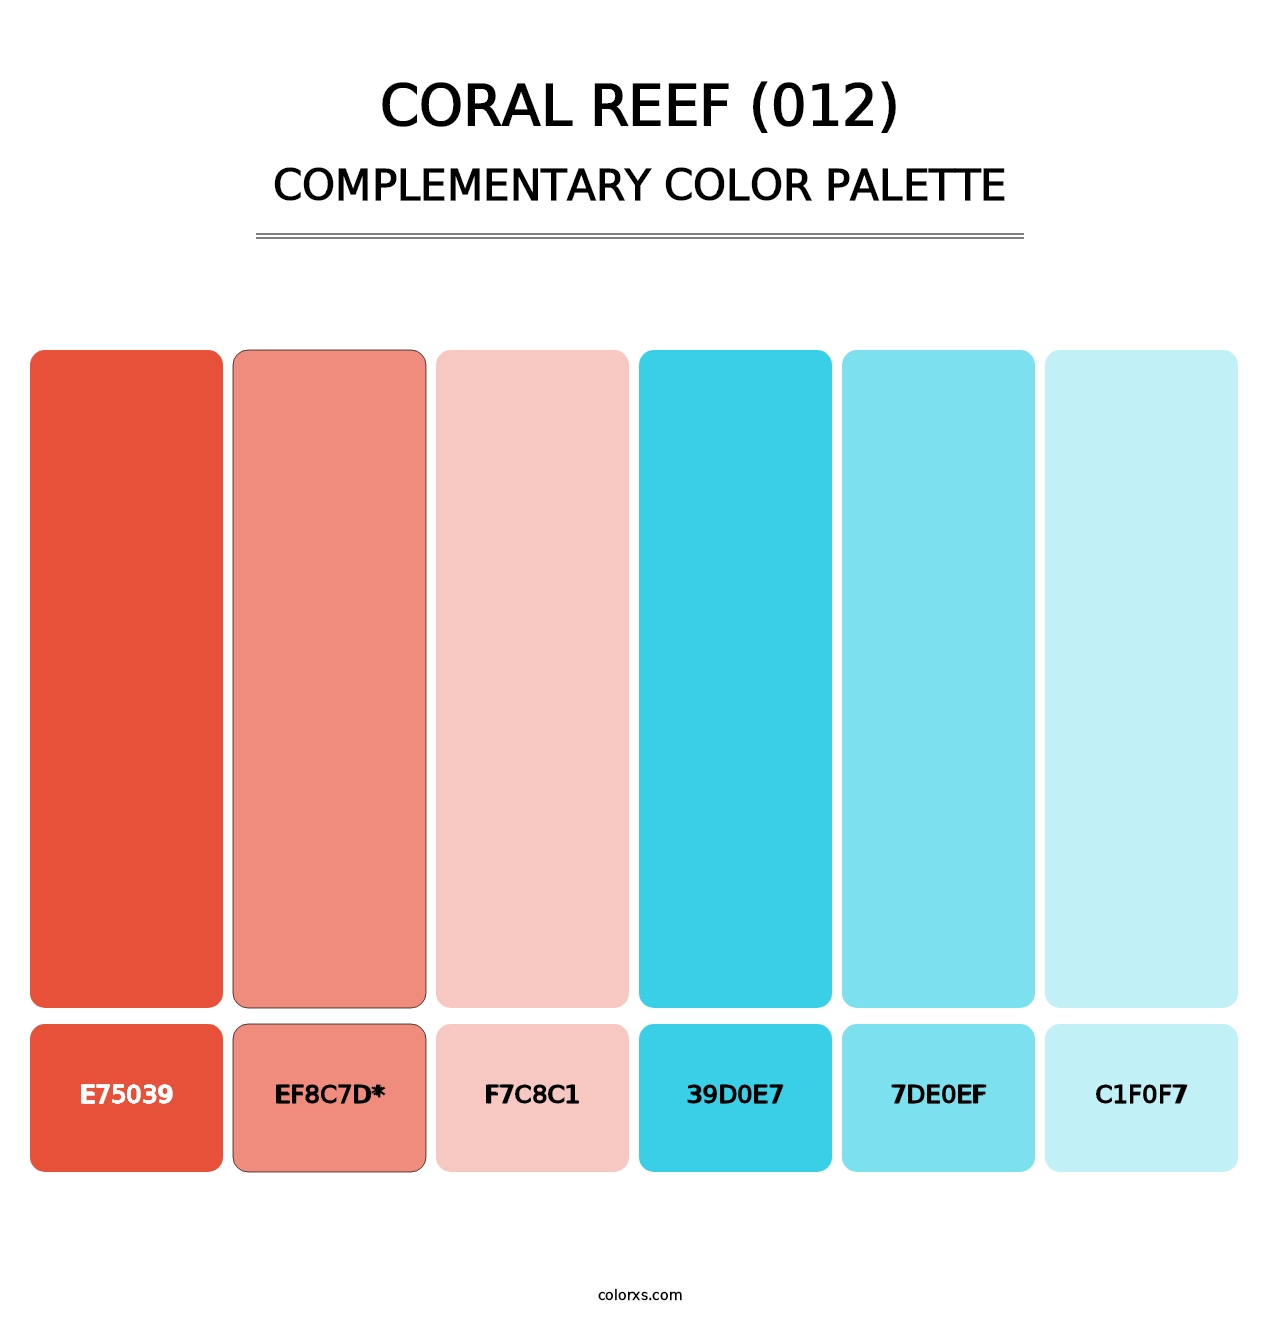 Coral Reef (012) - Complementary Color Palette